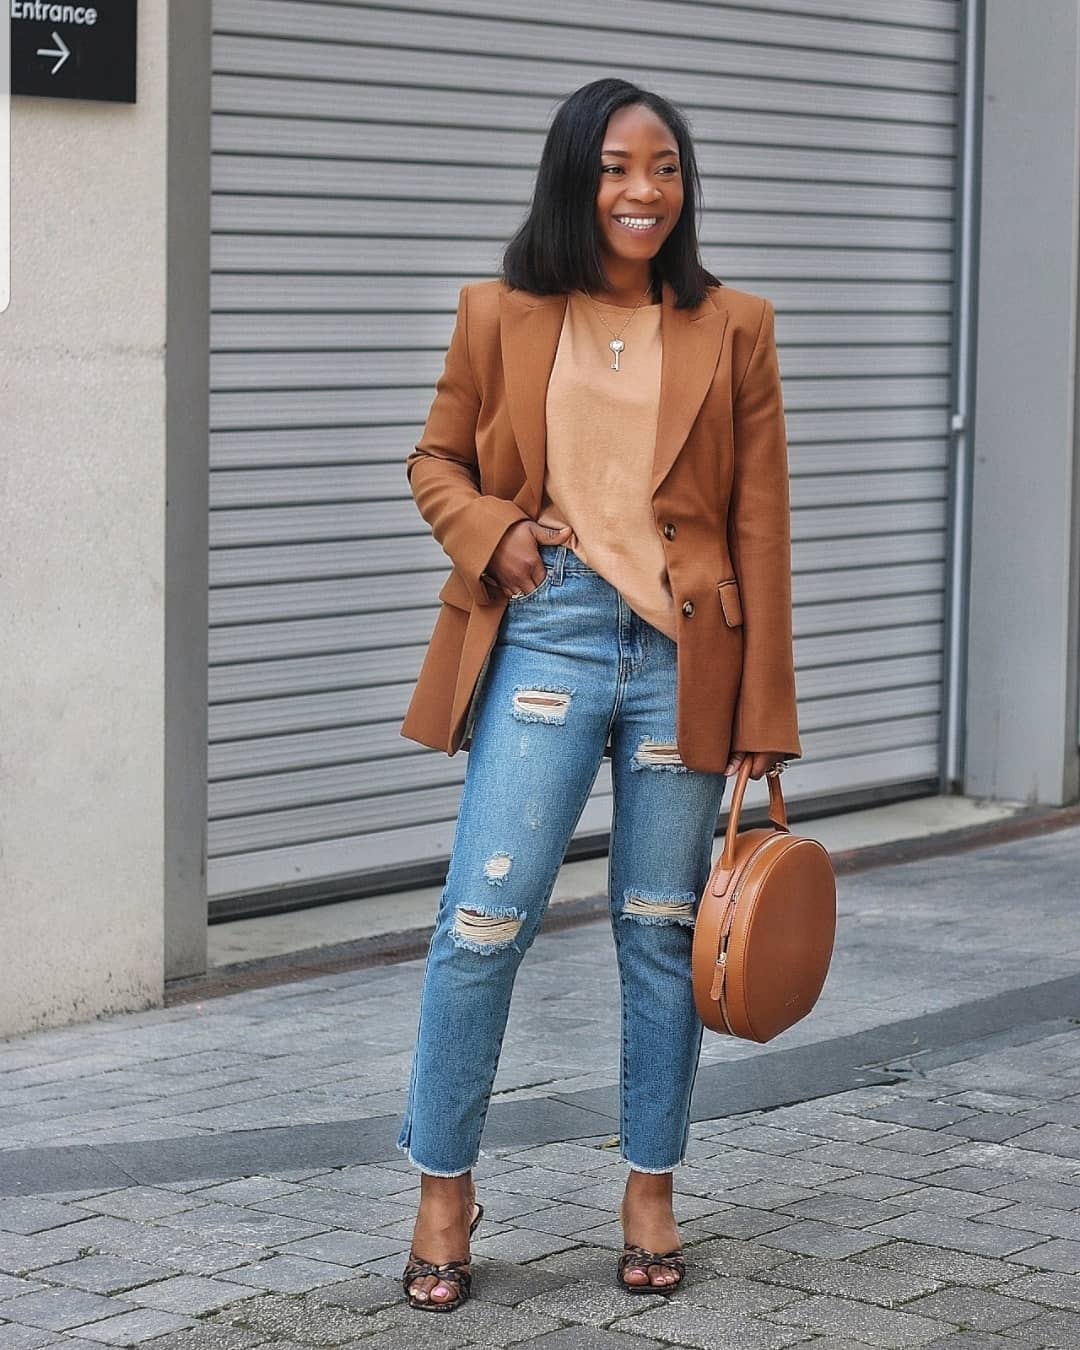 10 different unique ways to style Tan blazers.